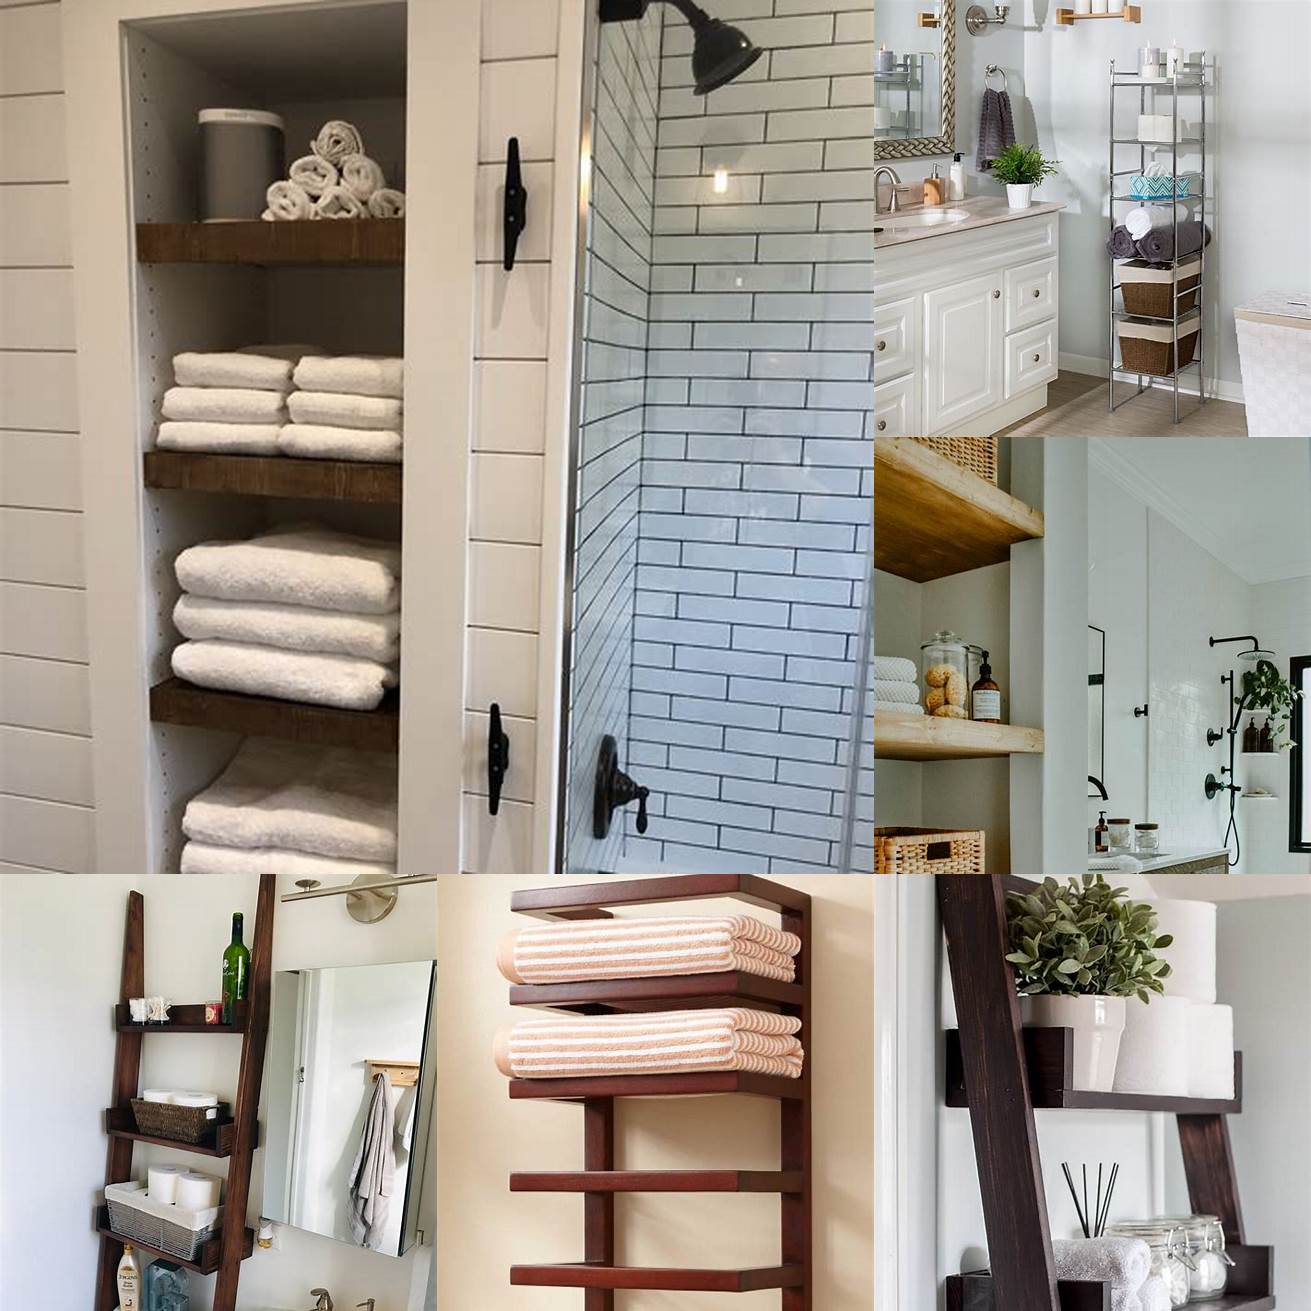 Open shelving can provide easy access to towels and other bathroom essentials